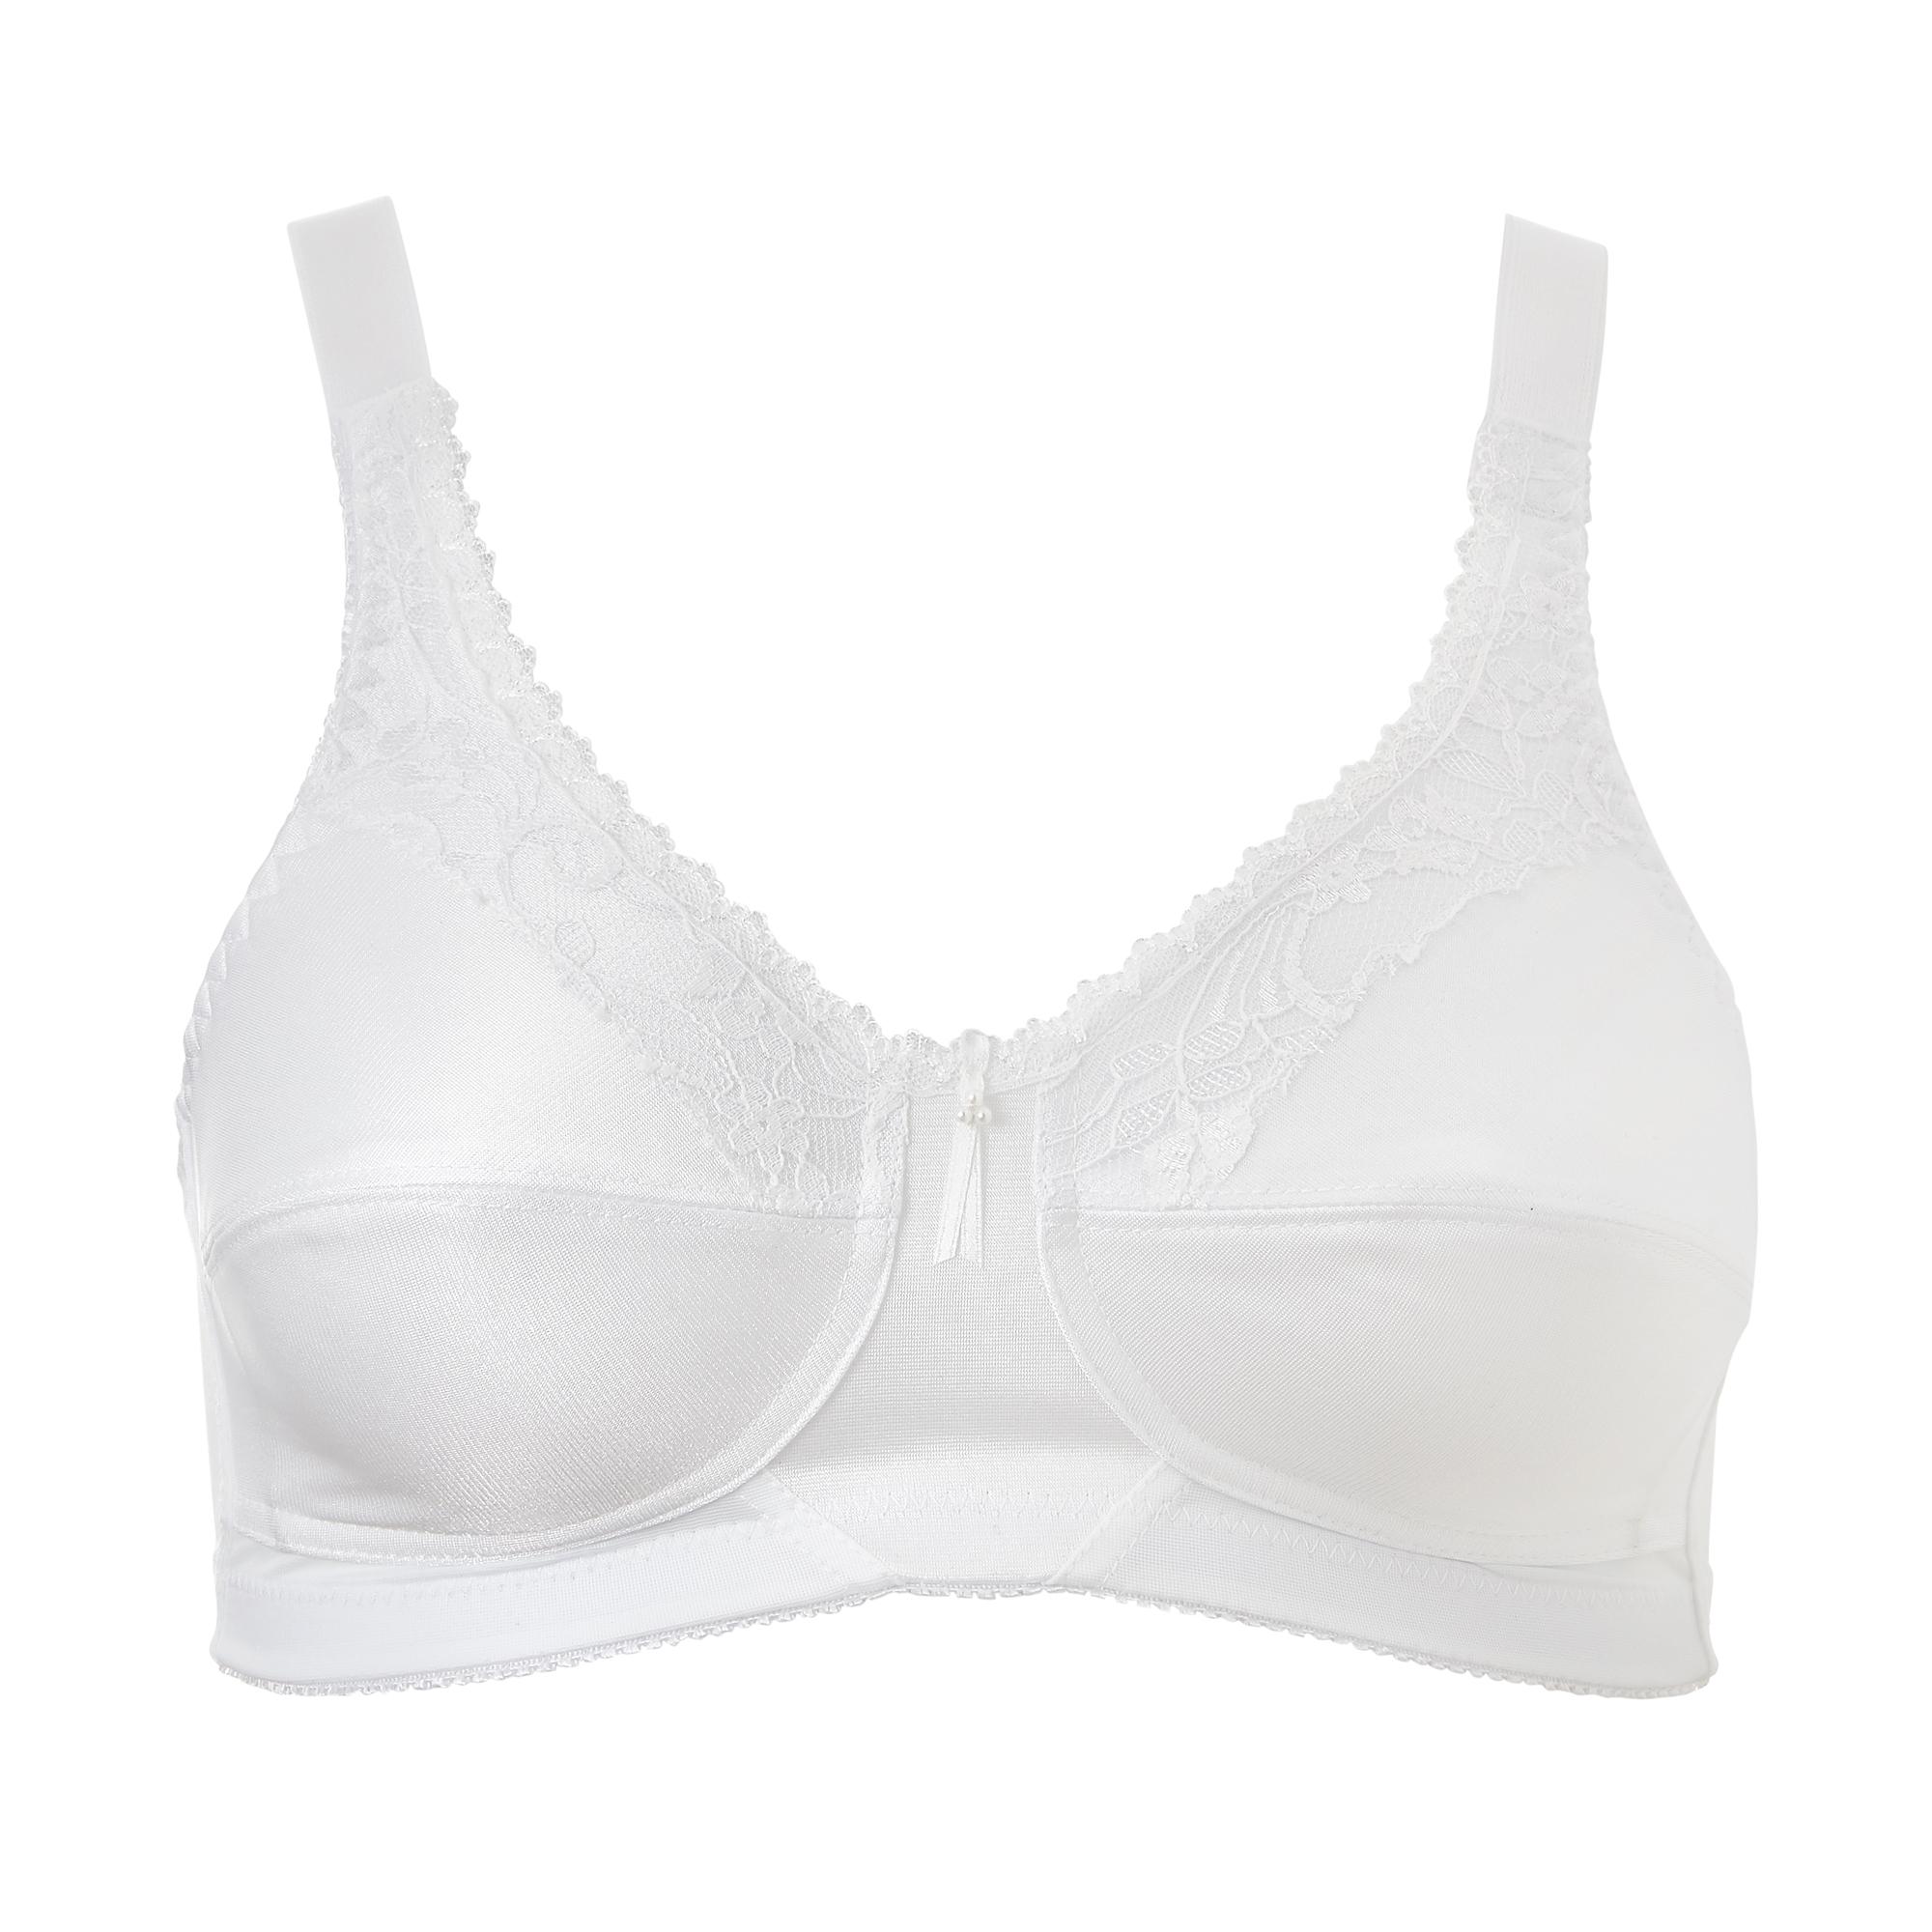 Orchid Mastectomy Bra - White Right Pocket - 34B & 34D only